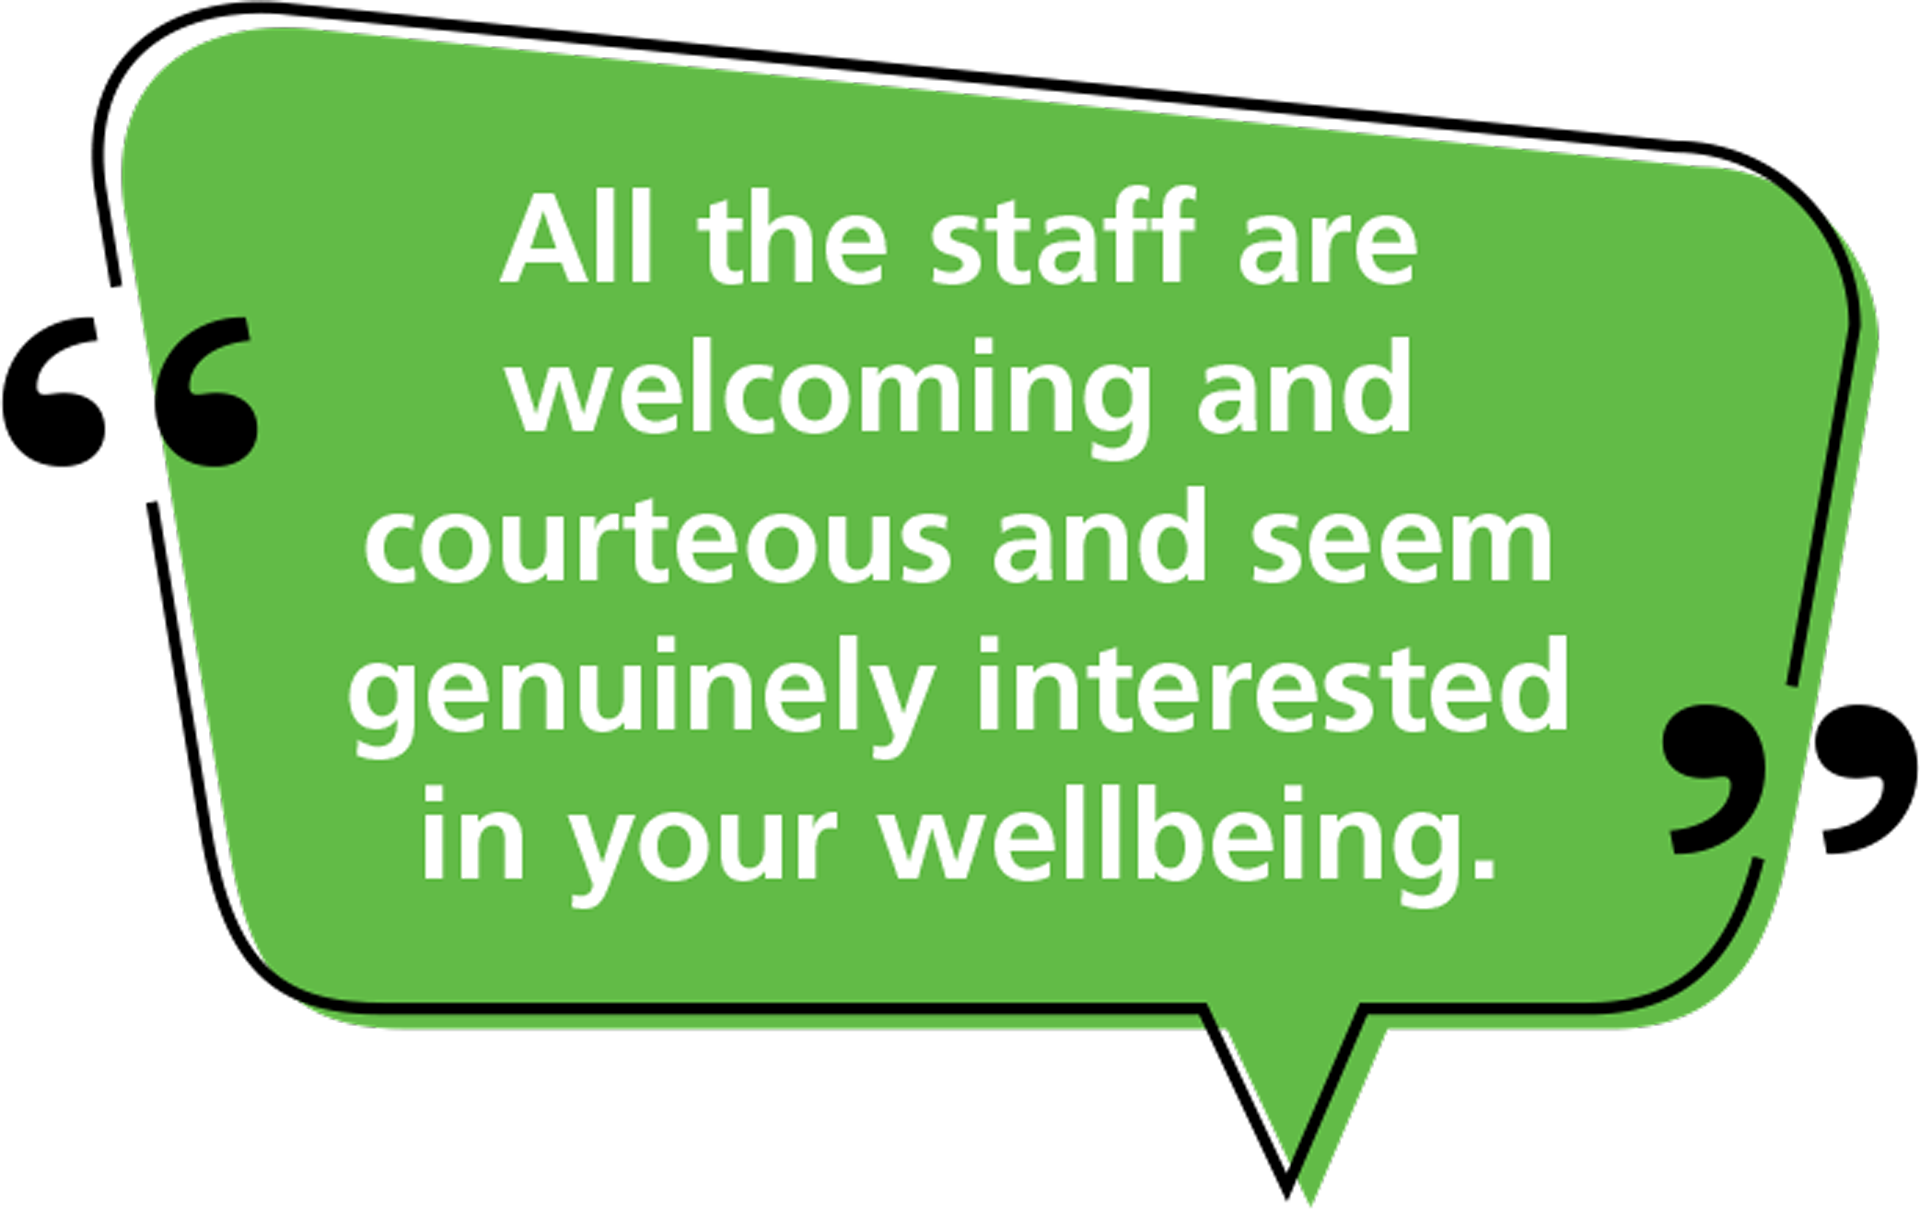 Quote: All the staff are welcoming and courteous and seem genuinely interested in your wellbeing.